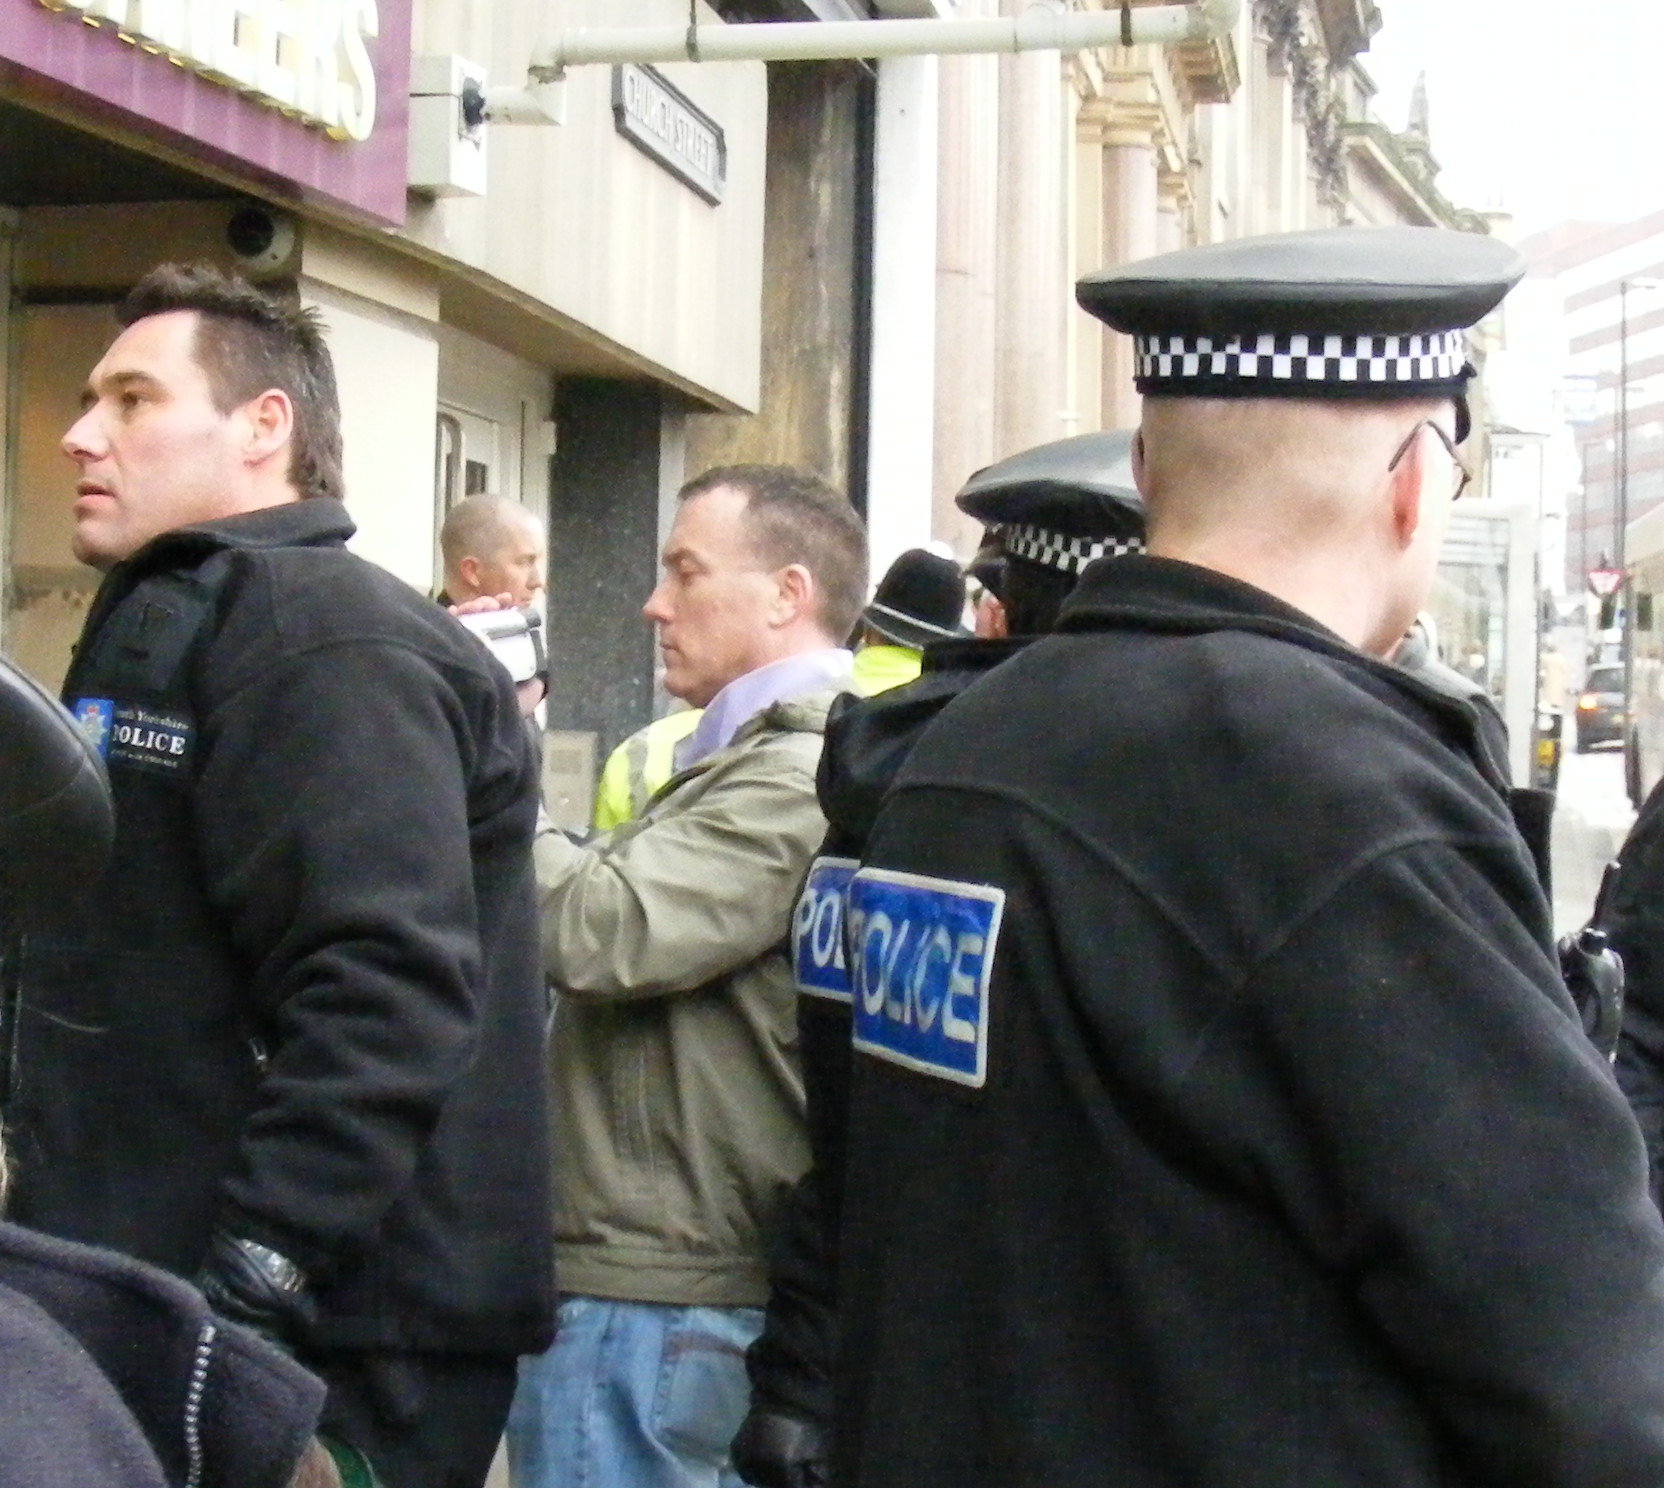 the mystery camera man, rather chummy with the police